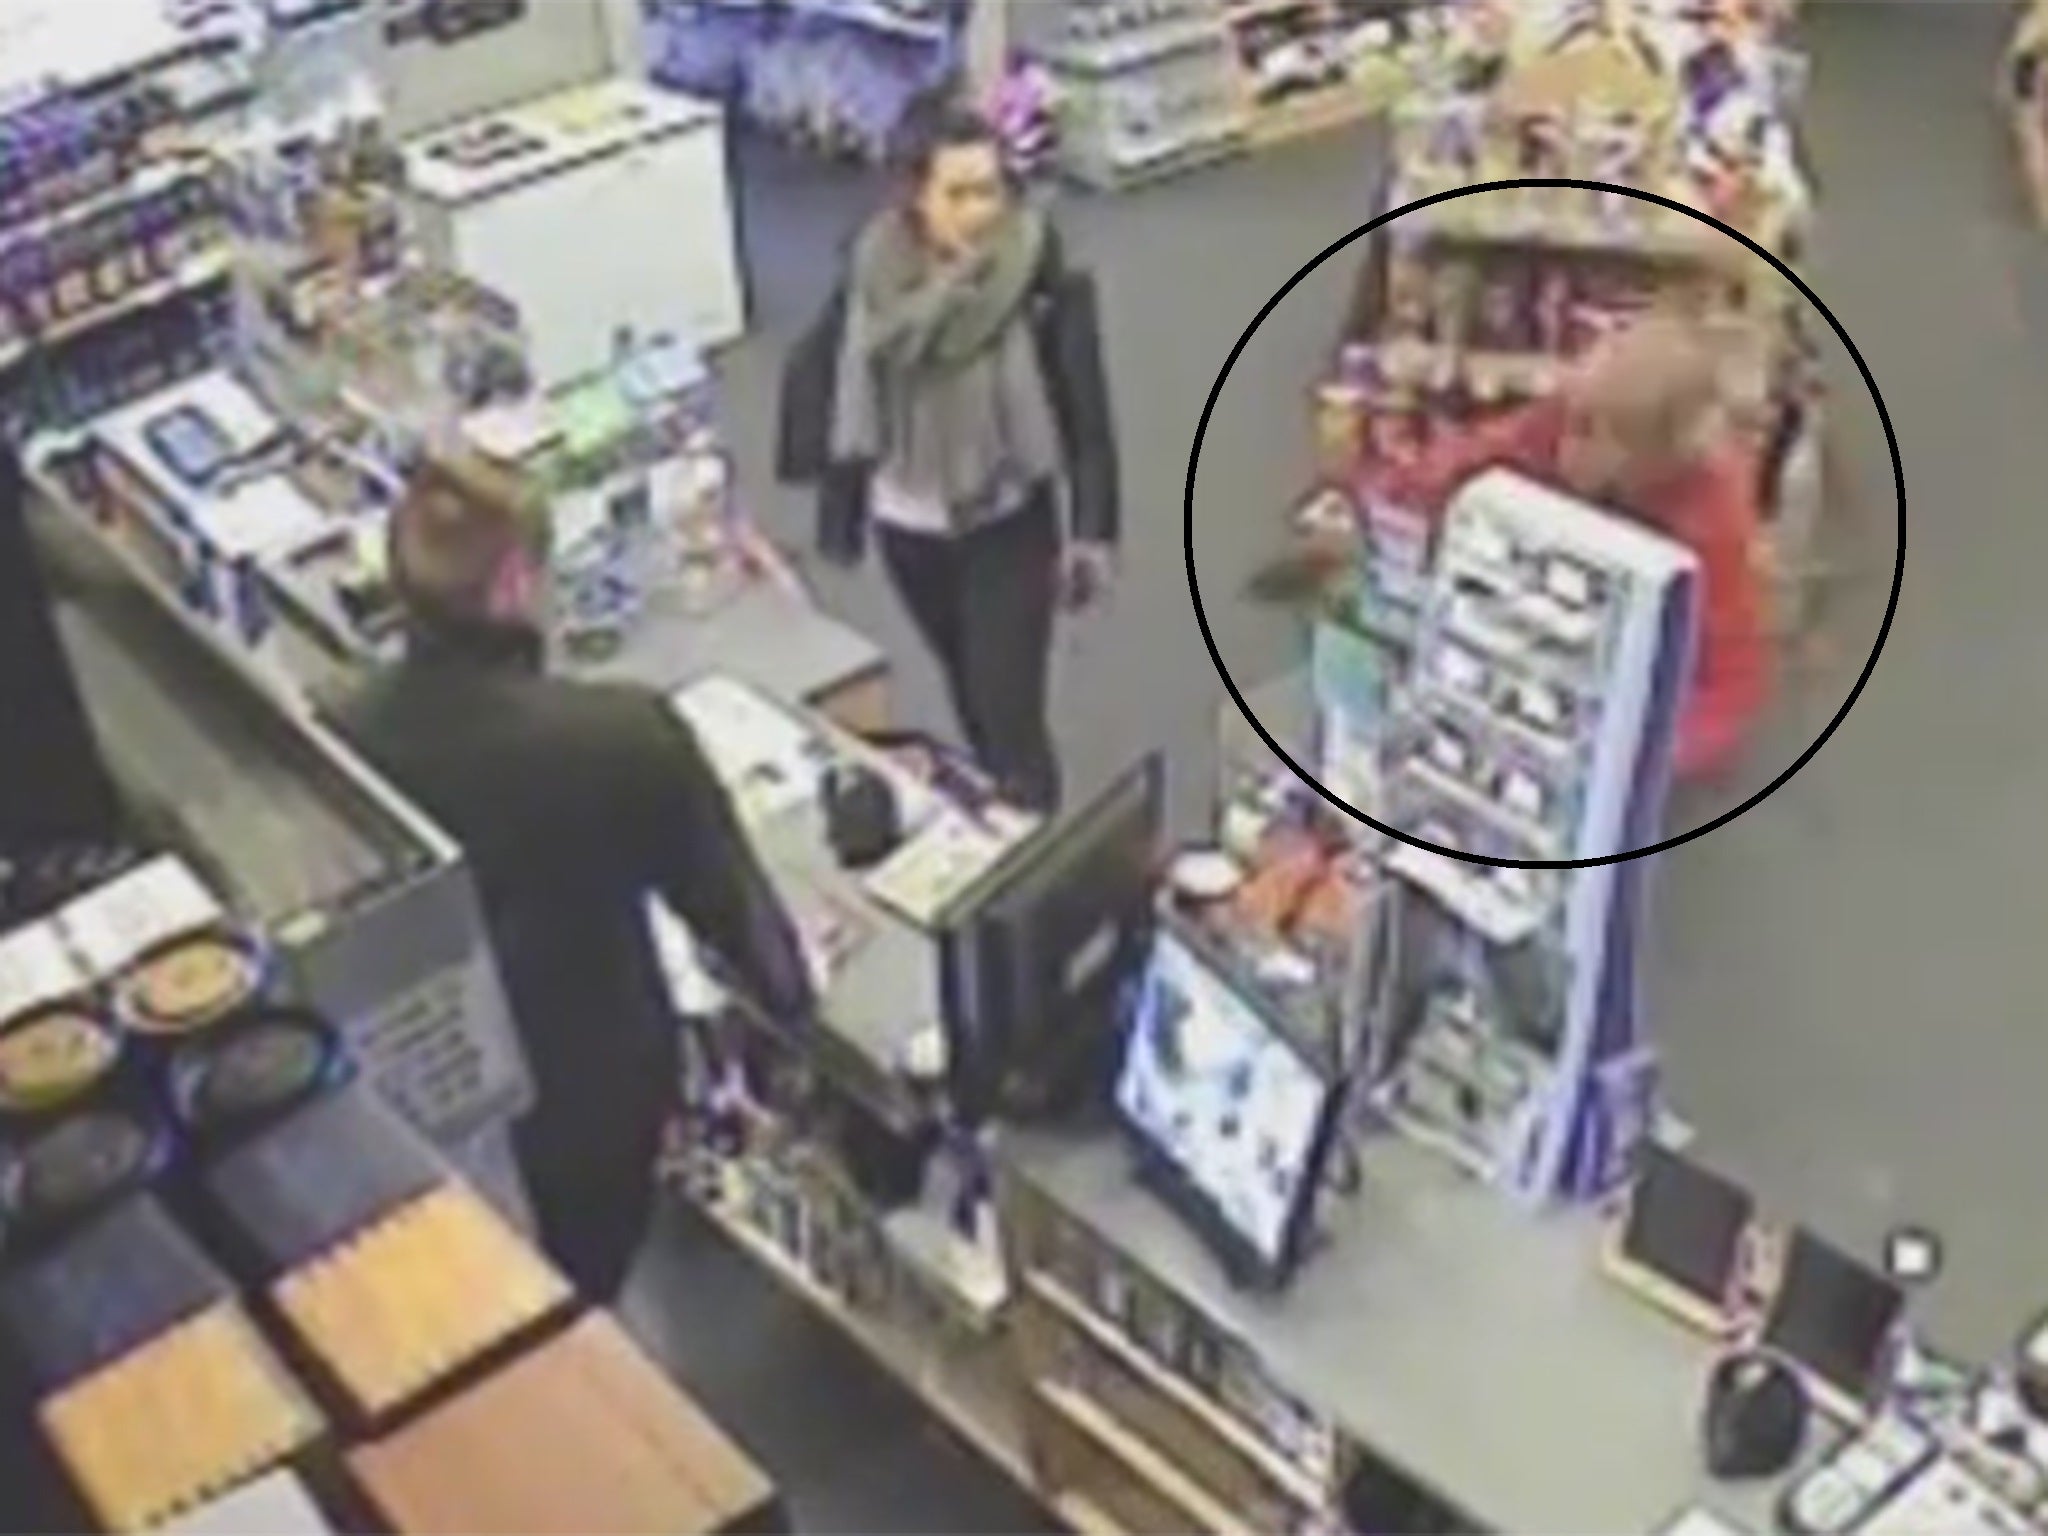 The moment the armed robber slips over